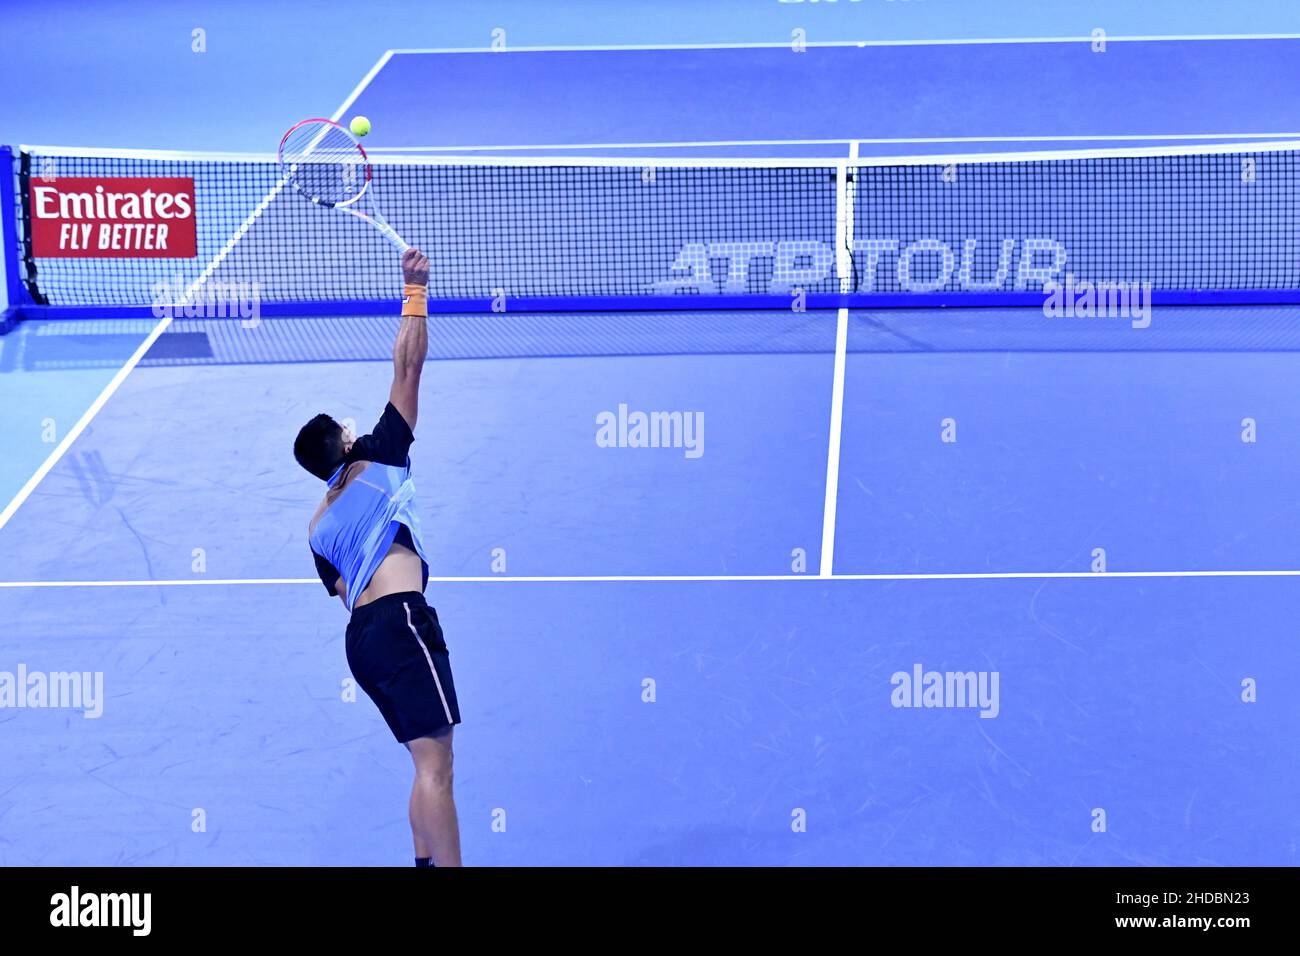 Tennis service during a Tennis match of the Next Gen ATP Finals at the indoor tennis court of the Allianz Cloud, in Milan 2021. Stock Photo